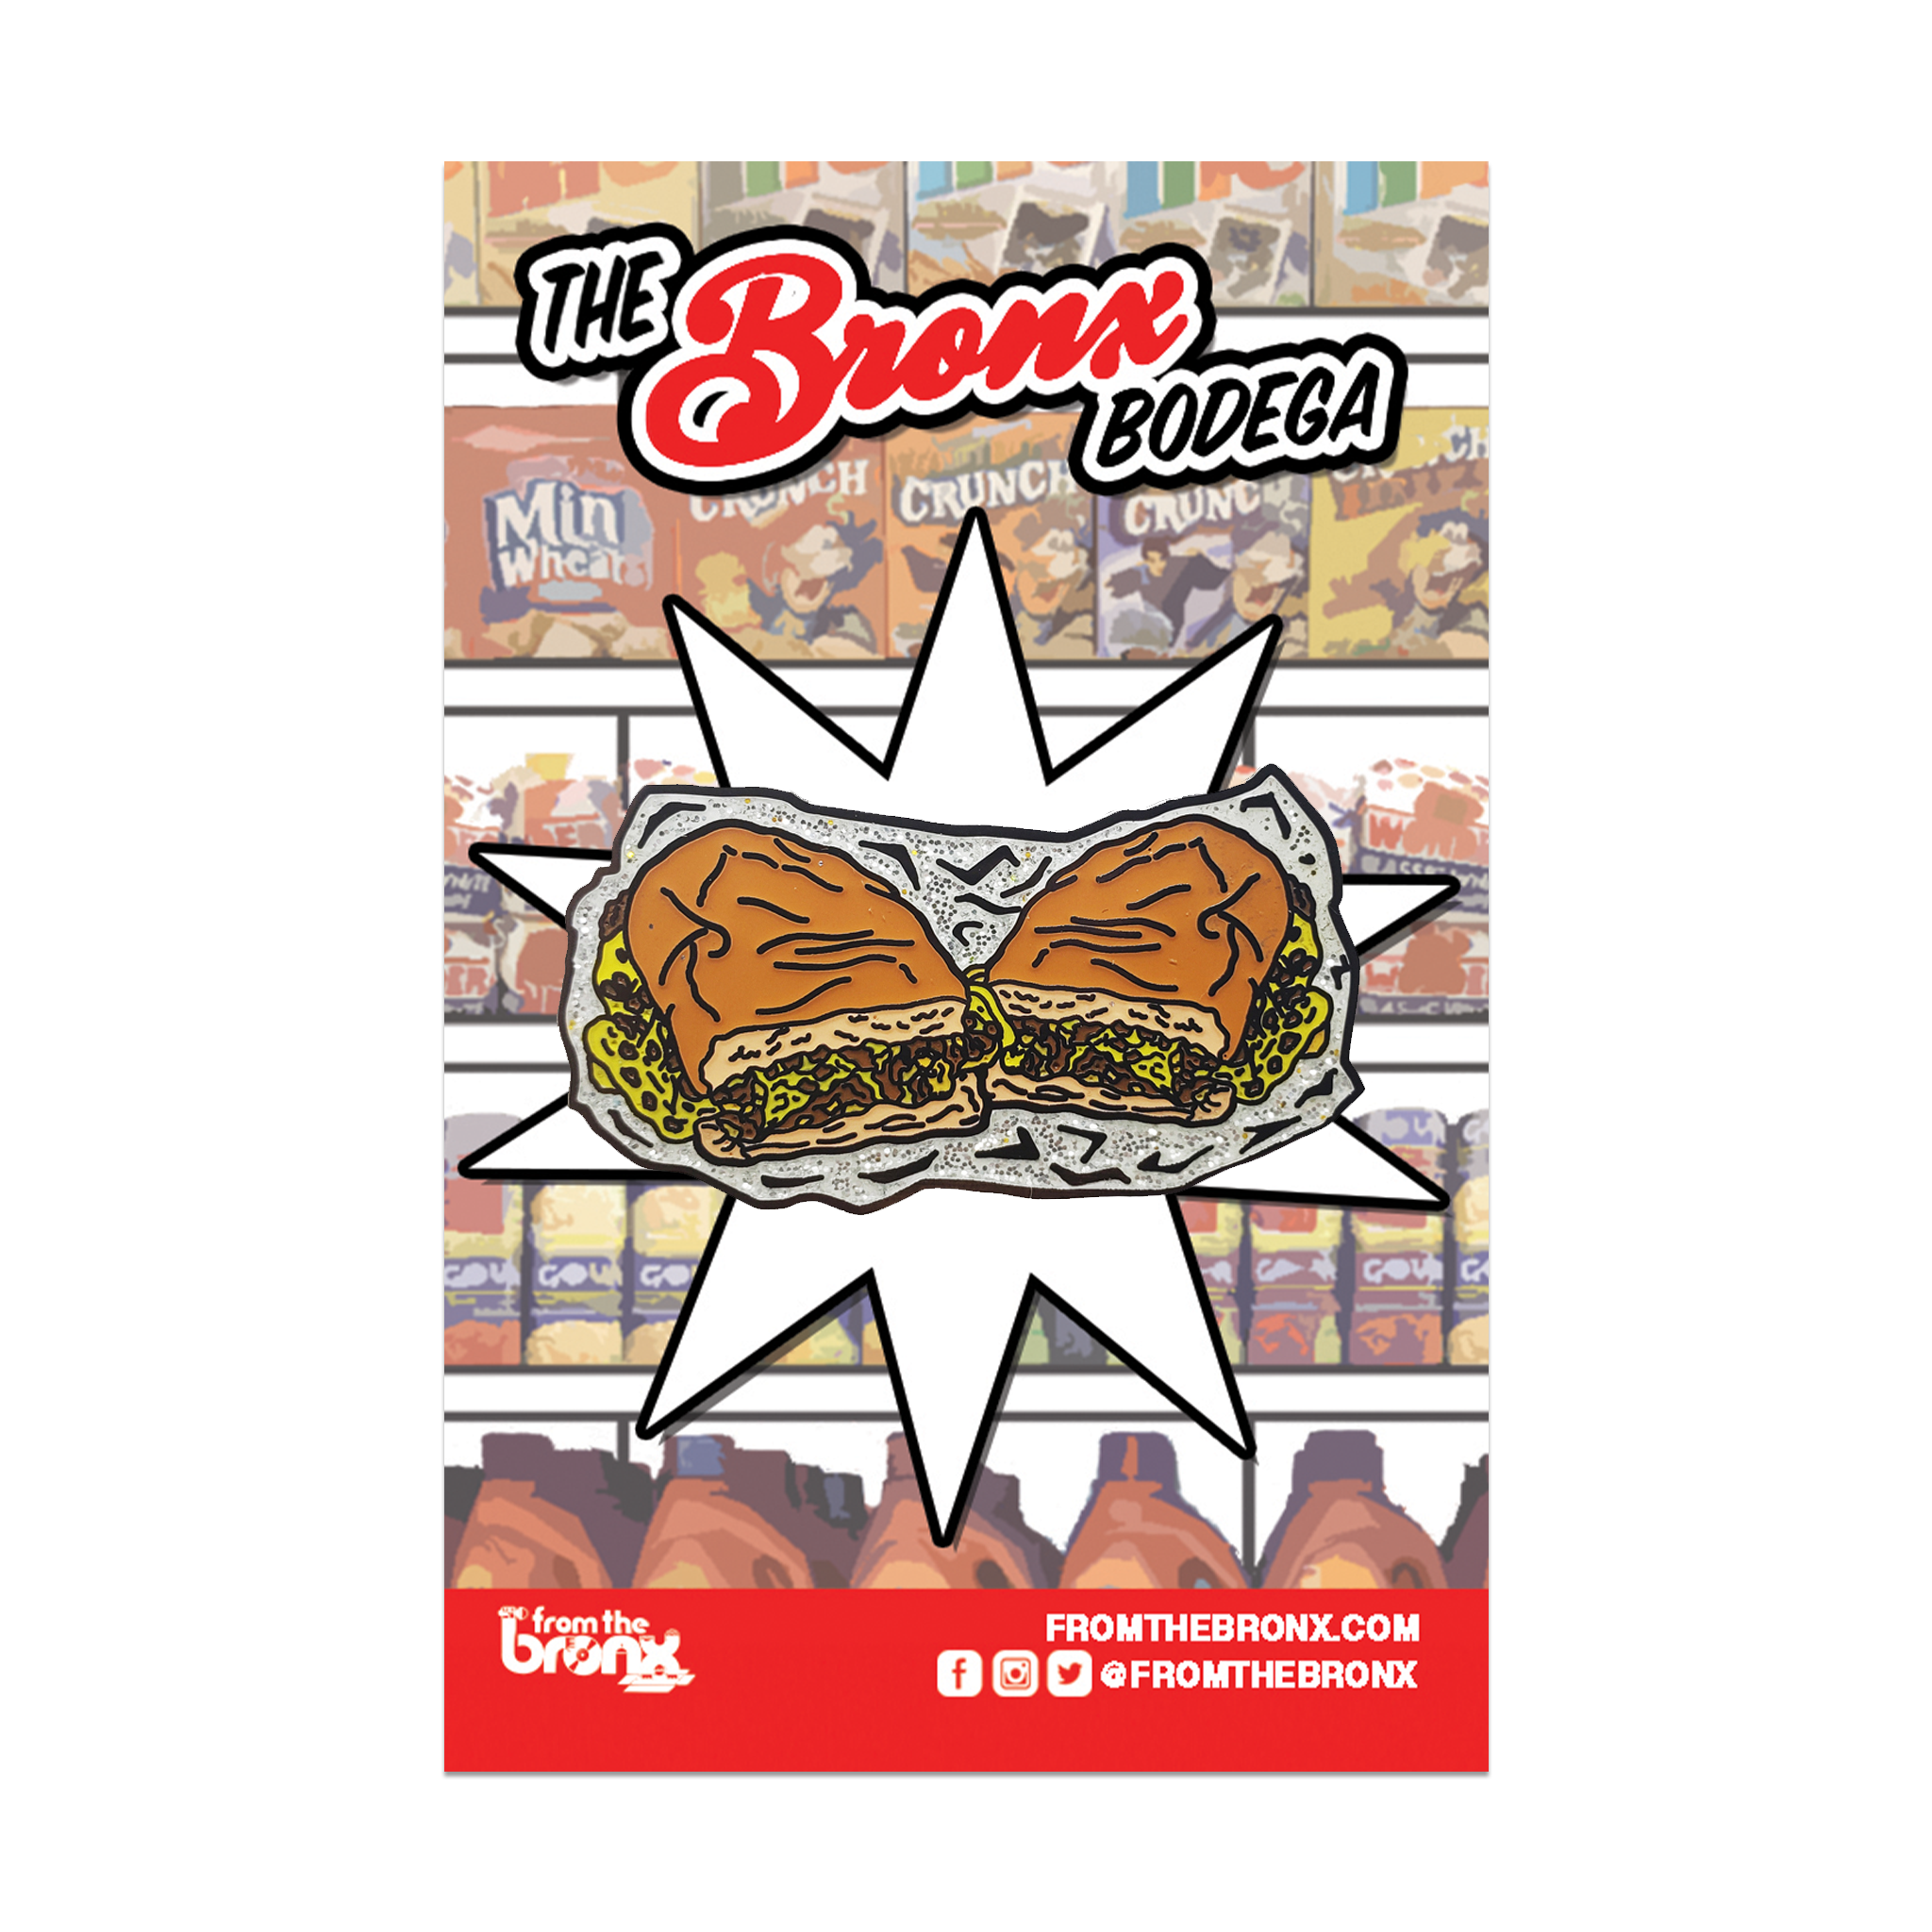 Chopped Cheese Hard Enamel Pin with Backing Card